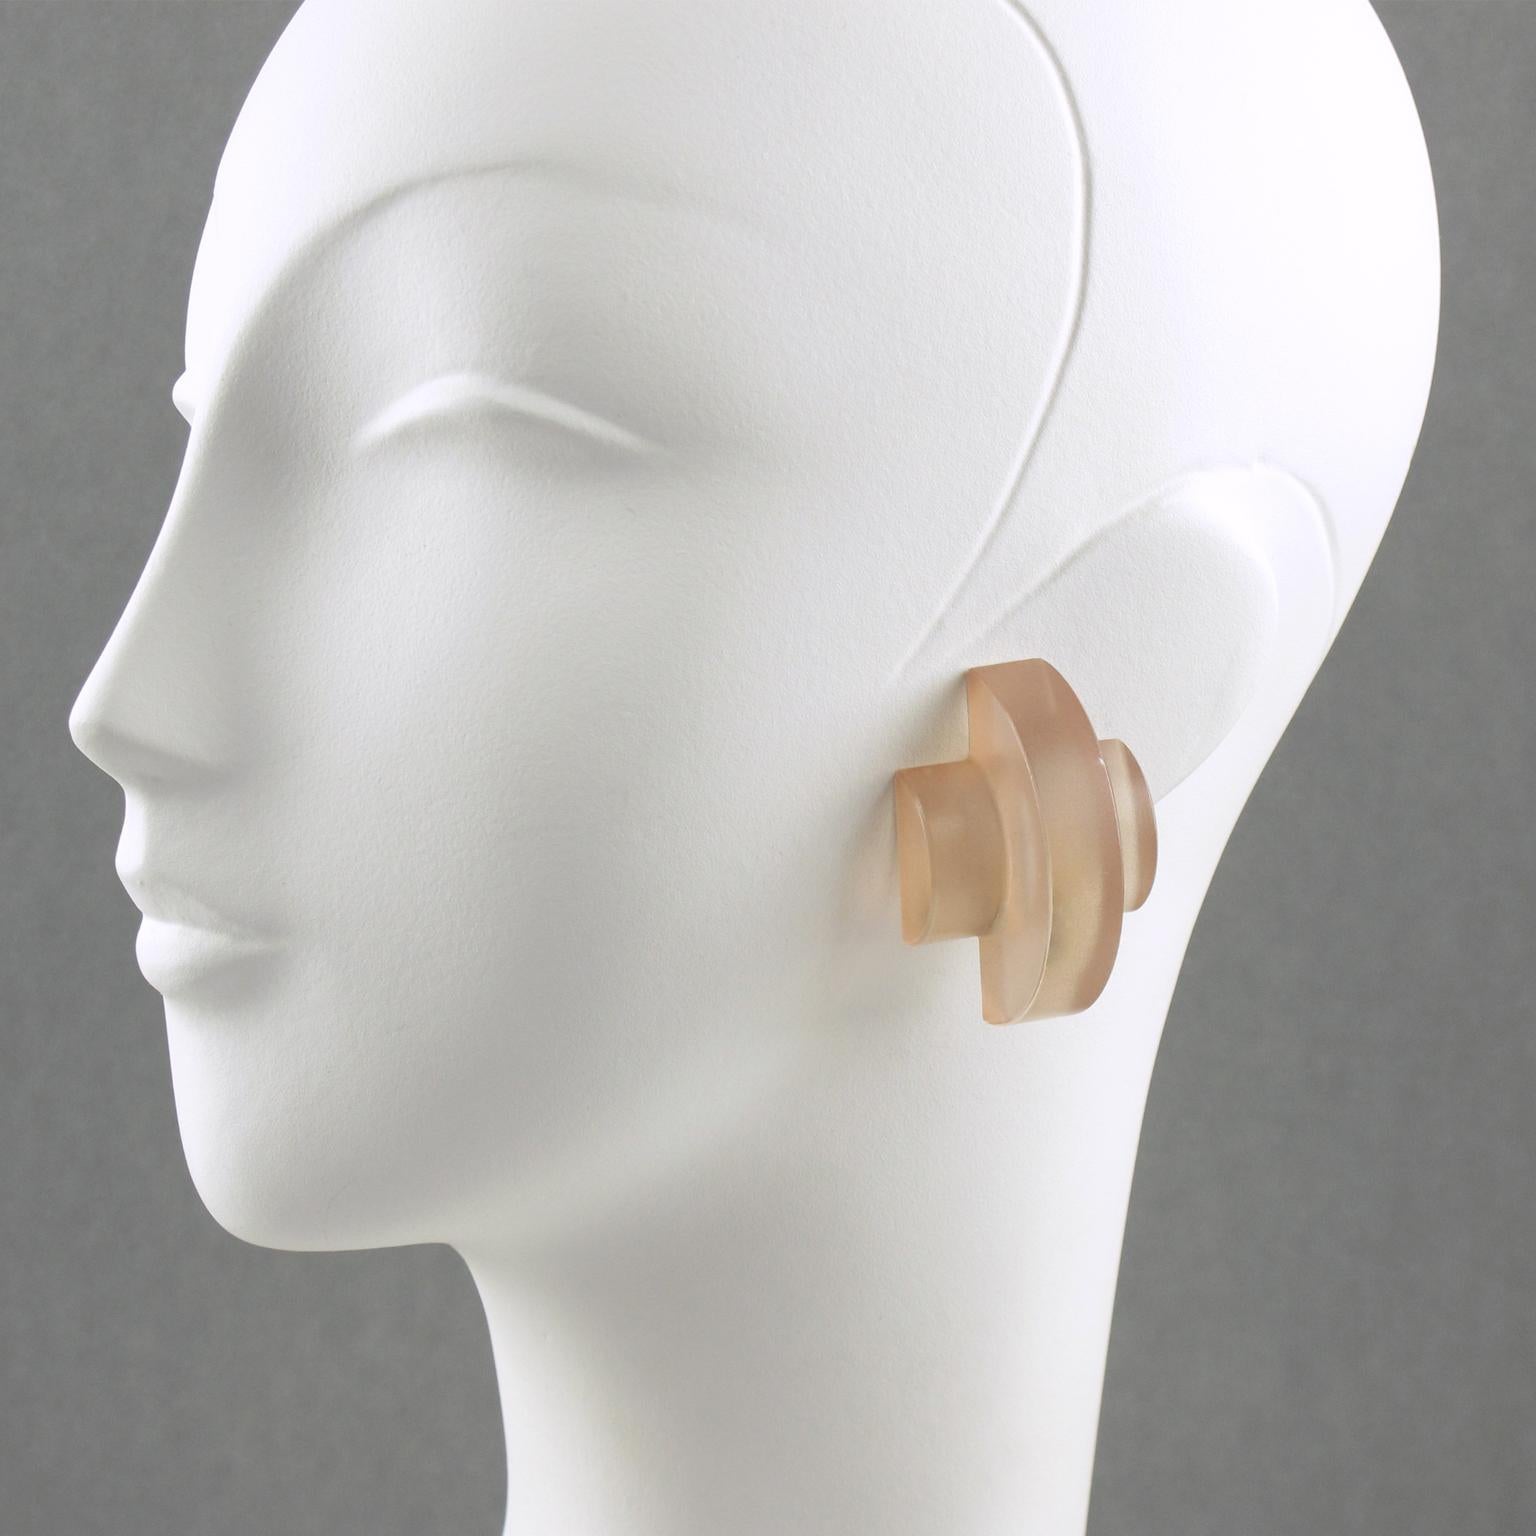 These impressive carved Lucite clip-on earrings feature a dimensional geometric shape in frosted light pink nude color. There is no visible maker's mark.
Measurements: 1.19 in. wide (3 cm) x 1.75 in. high (4.5 cm) x 0.88 in. deep (2.2 cm).